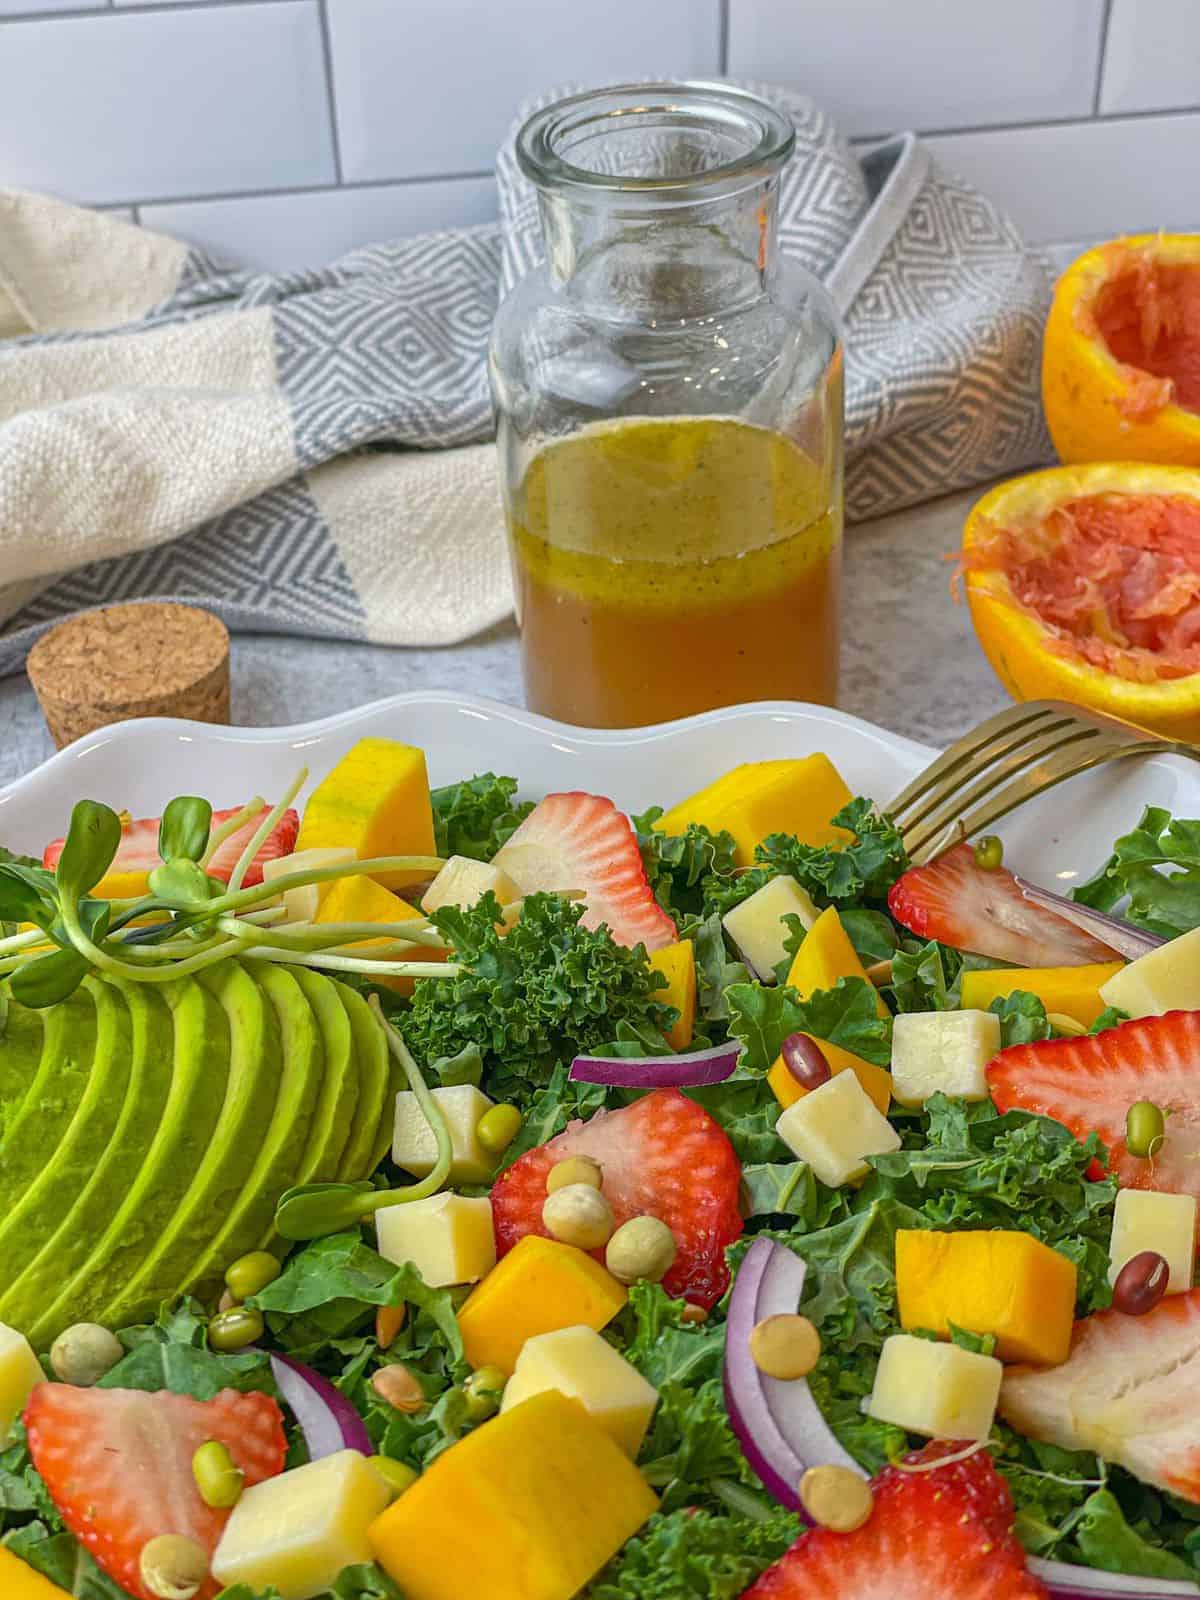 a tray of colorful salad made up of fresh veggies and fruits and placed next to a jar of citrus vinaigrette dressing